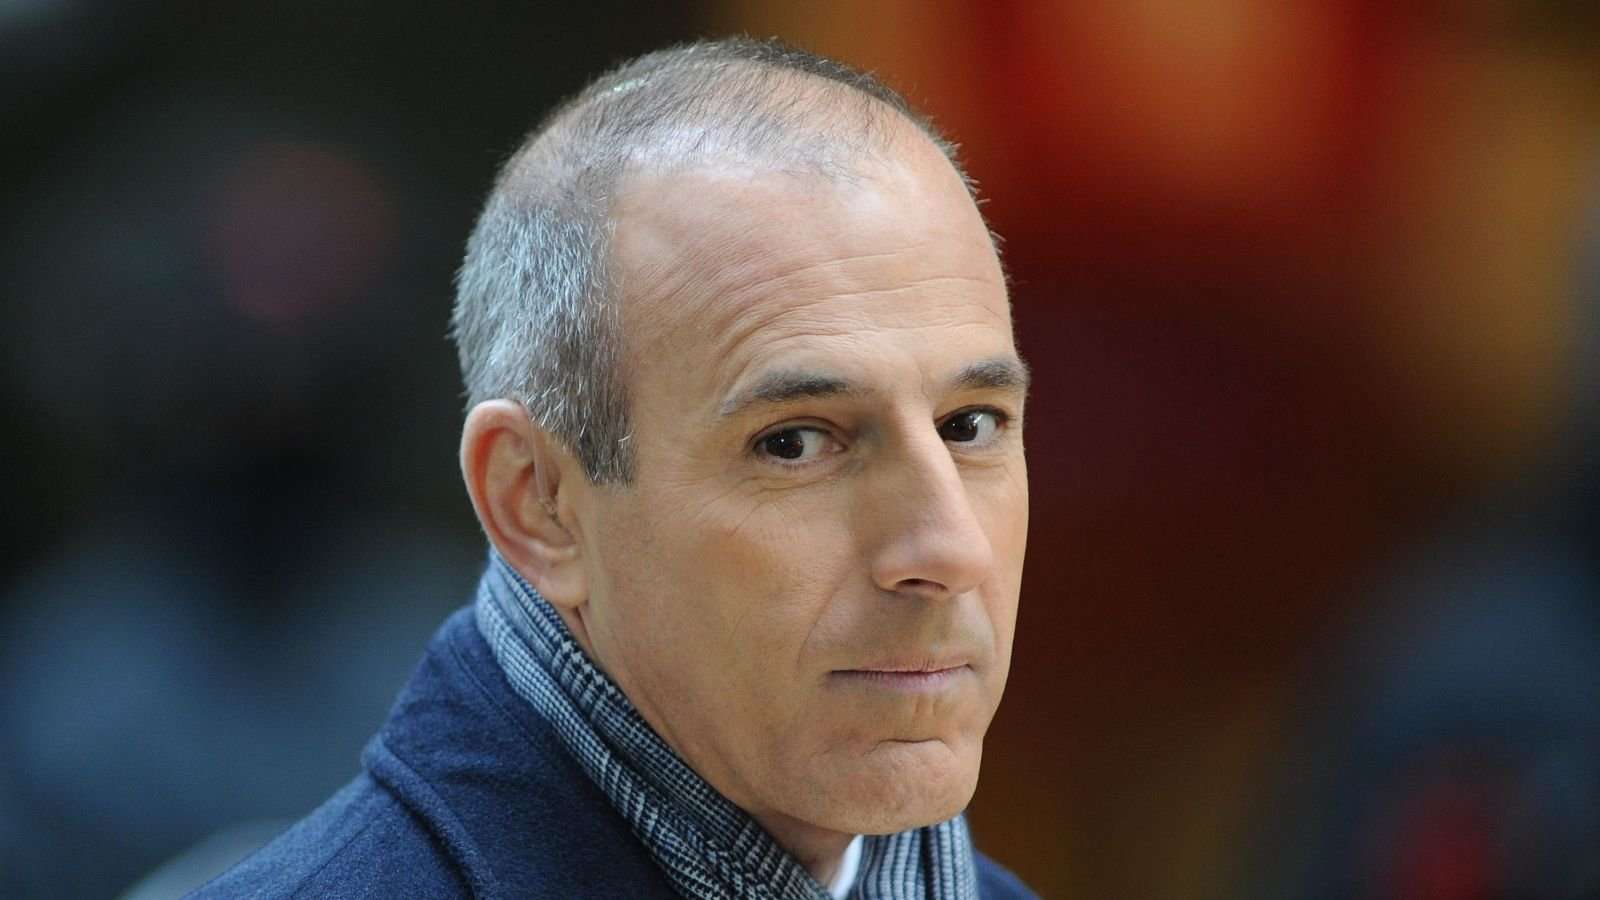 image for Matt Lauer tells fans, "don't worry, I'll be back on TV" after sexual misconduct allegations